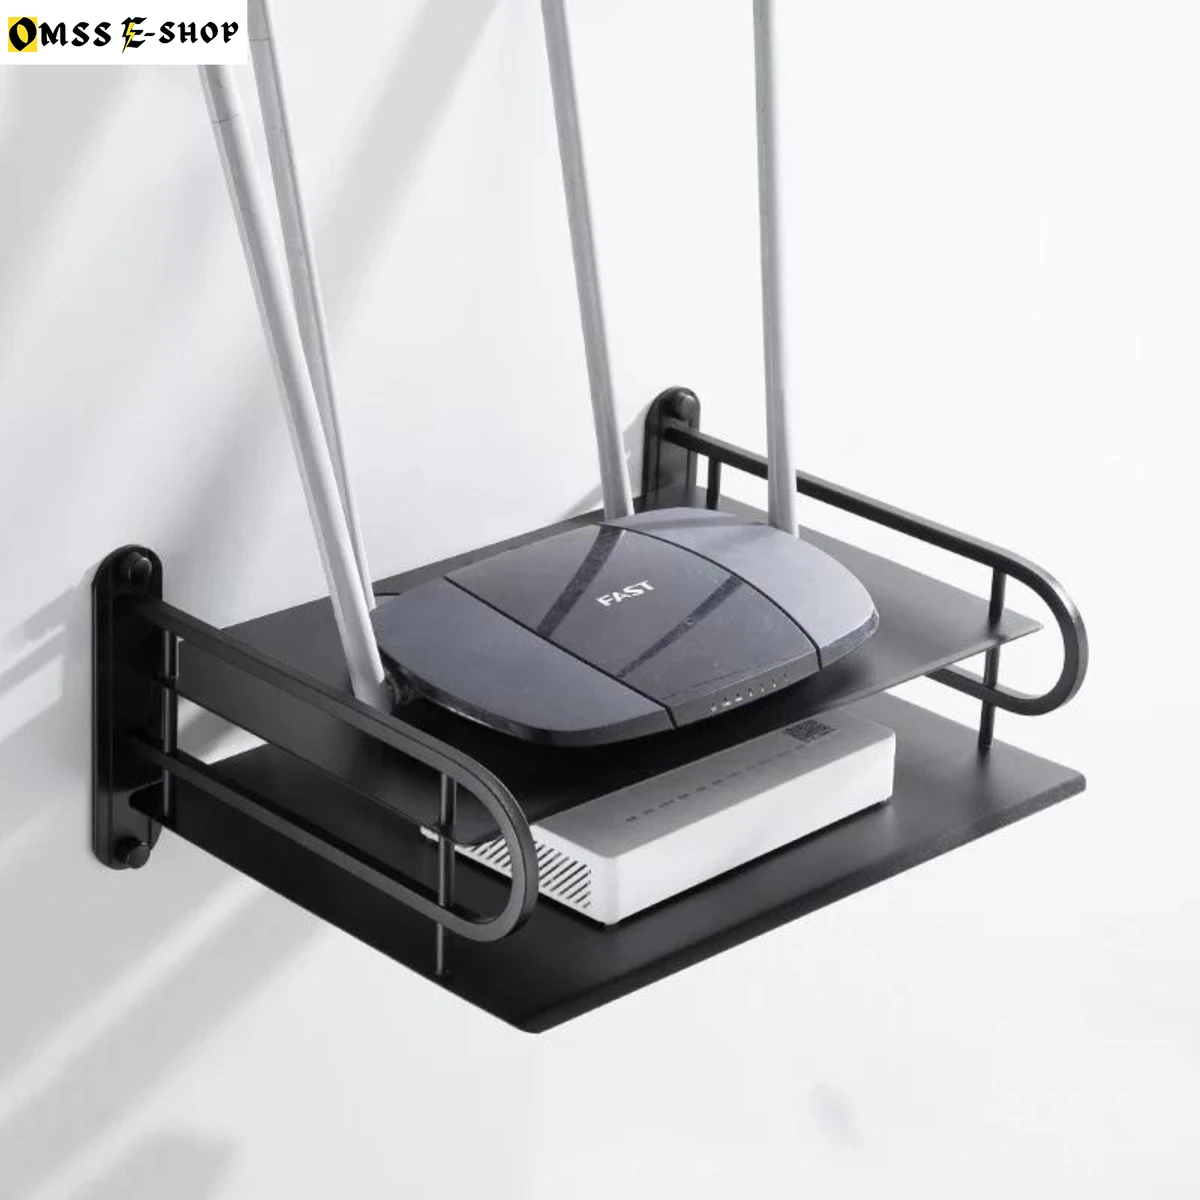 Black Metal Wall Mounted Multilayer Router Stand For Router, Speaker, Projectar, Fiber Modem, DVD players, Blu-ray players, game consoles, satellite TV box, cable TV box, sky box, etc. RP-490DH-RE